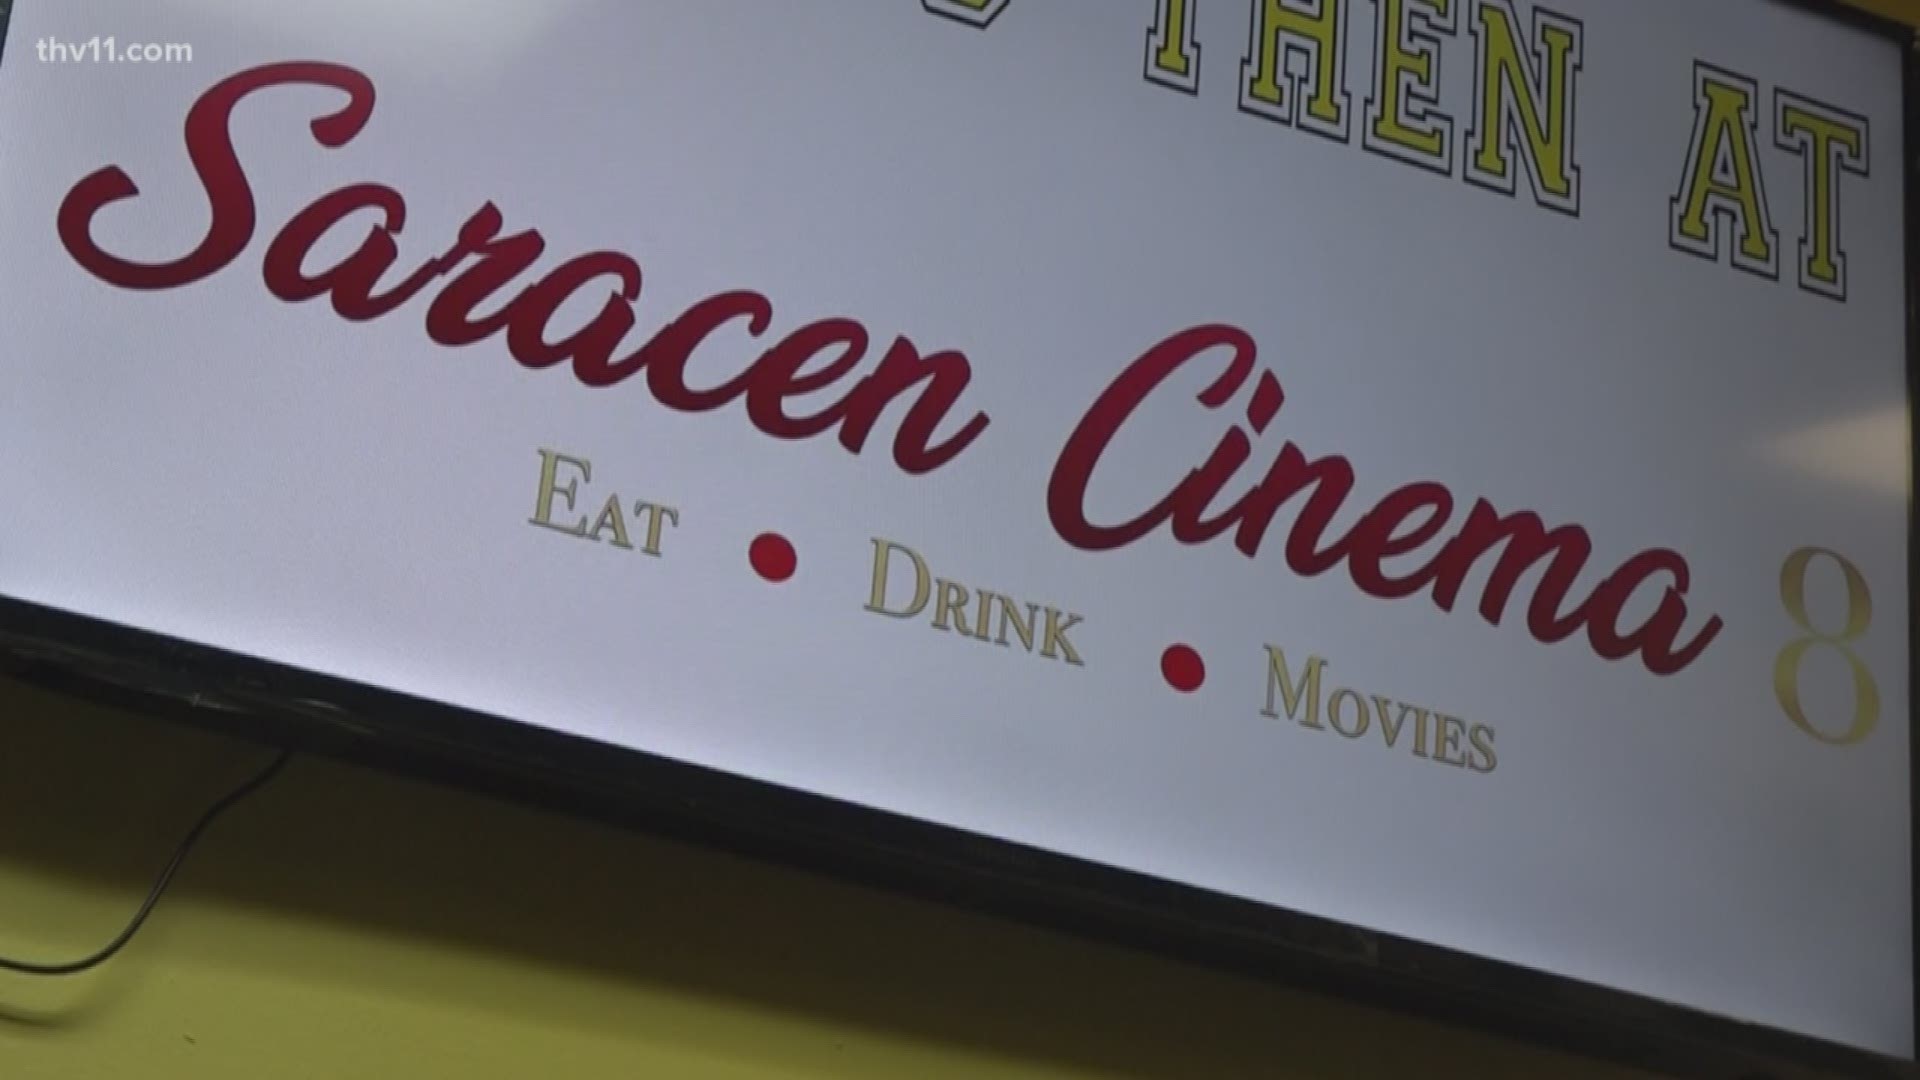 Rejoice movie fans! Pine Bluff residents will no longer have to travel to Little Rock to catch movies at the theater.